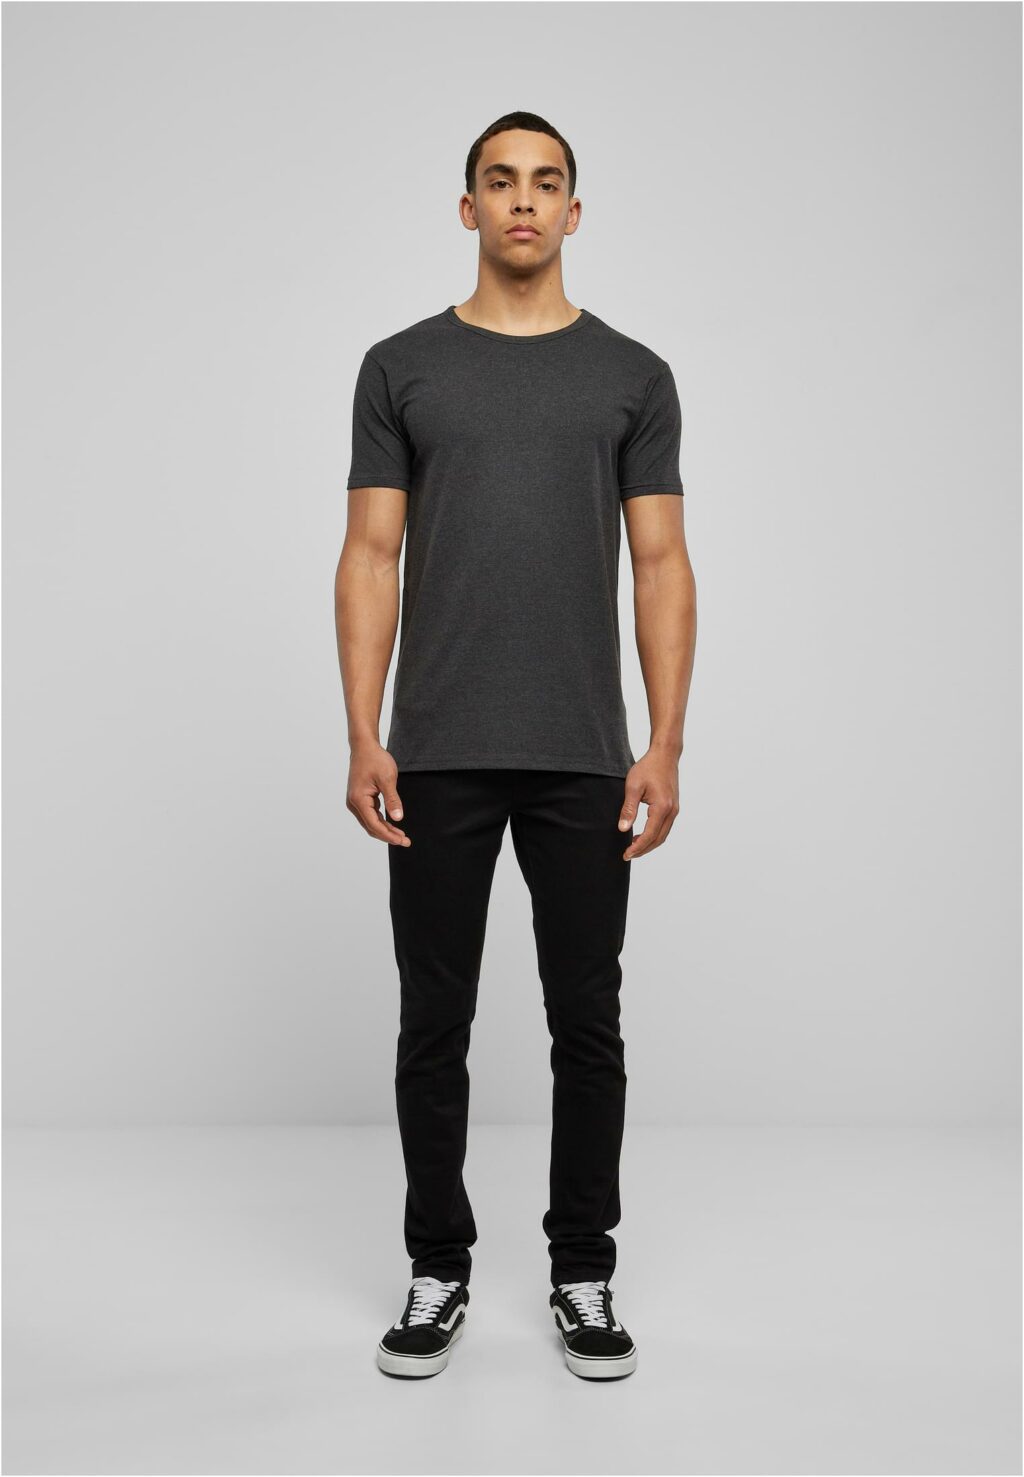 Urban Classics Fitted Stretch Tee charcoal TB814